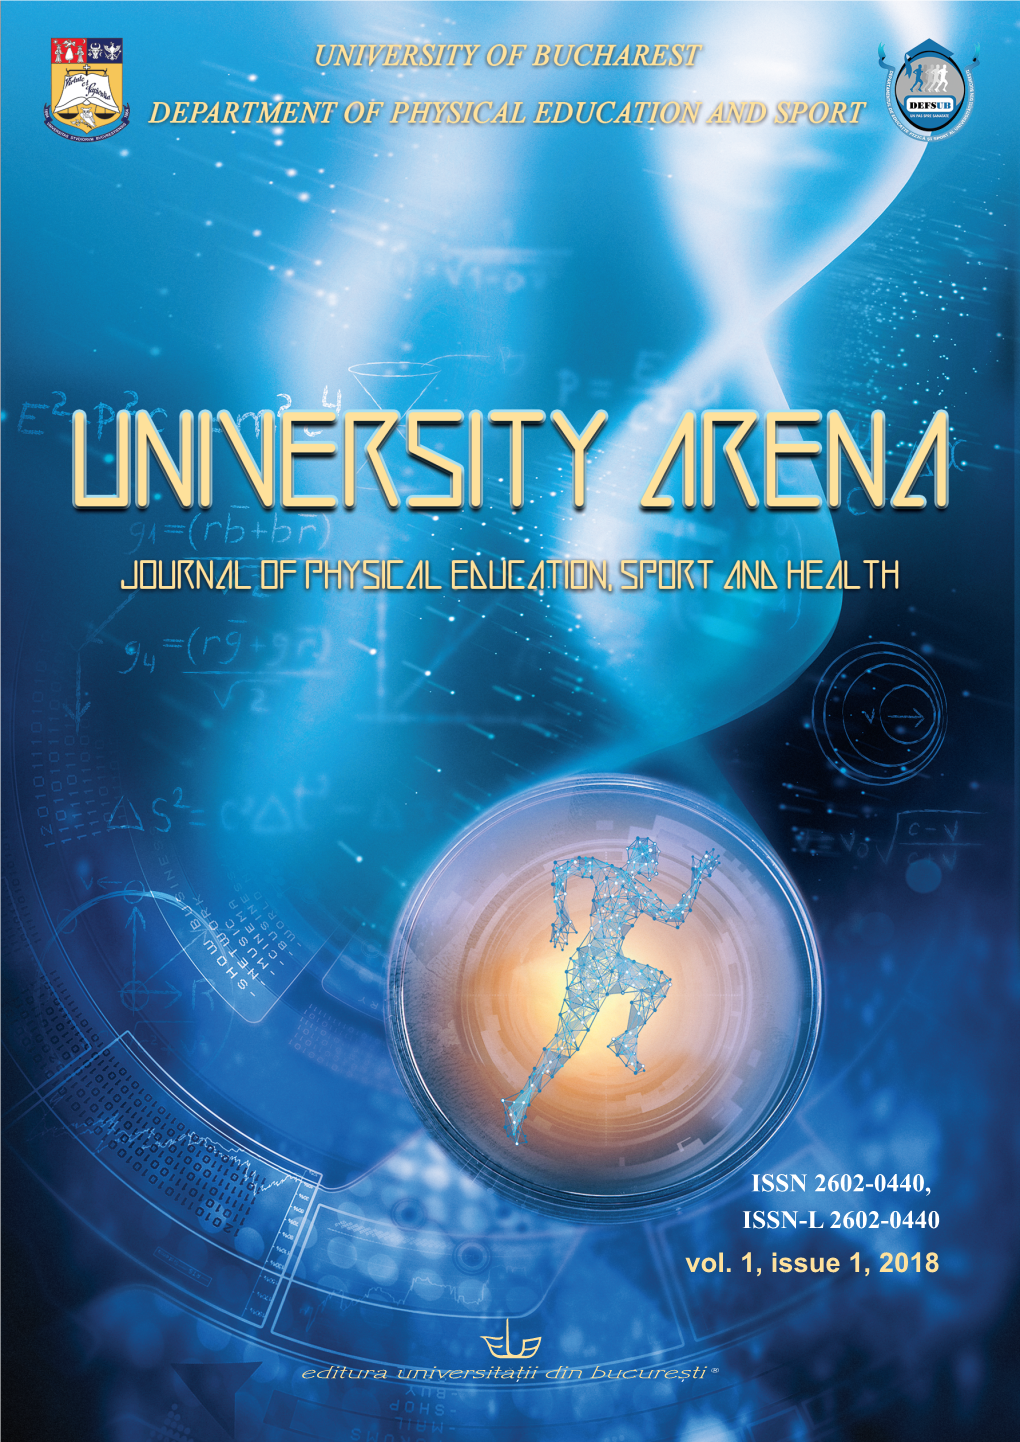 Vol. 1, Issue 1, 2018 UNIVERSITY of BUCHAREST DEPARTMENT of PHYSICAL EDUCATION and SPORT